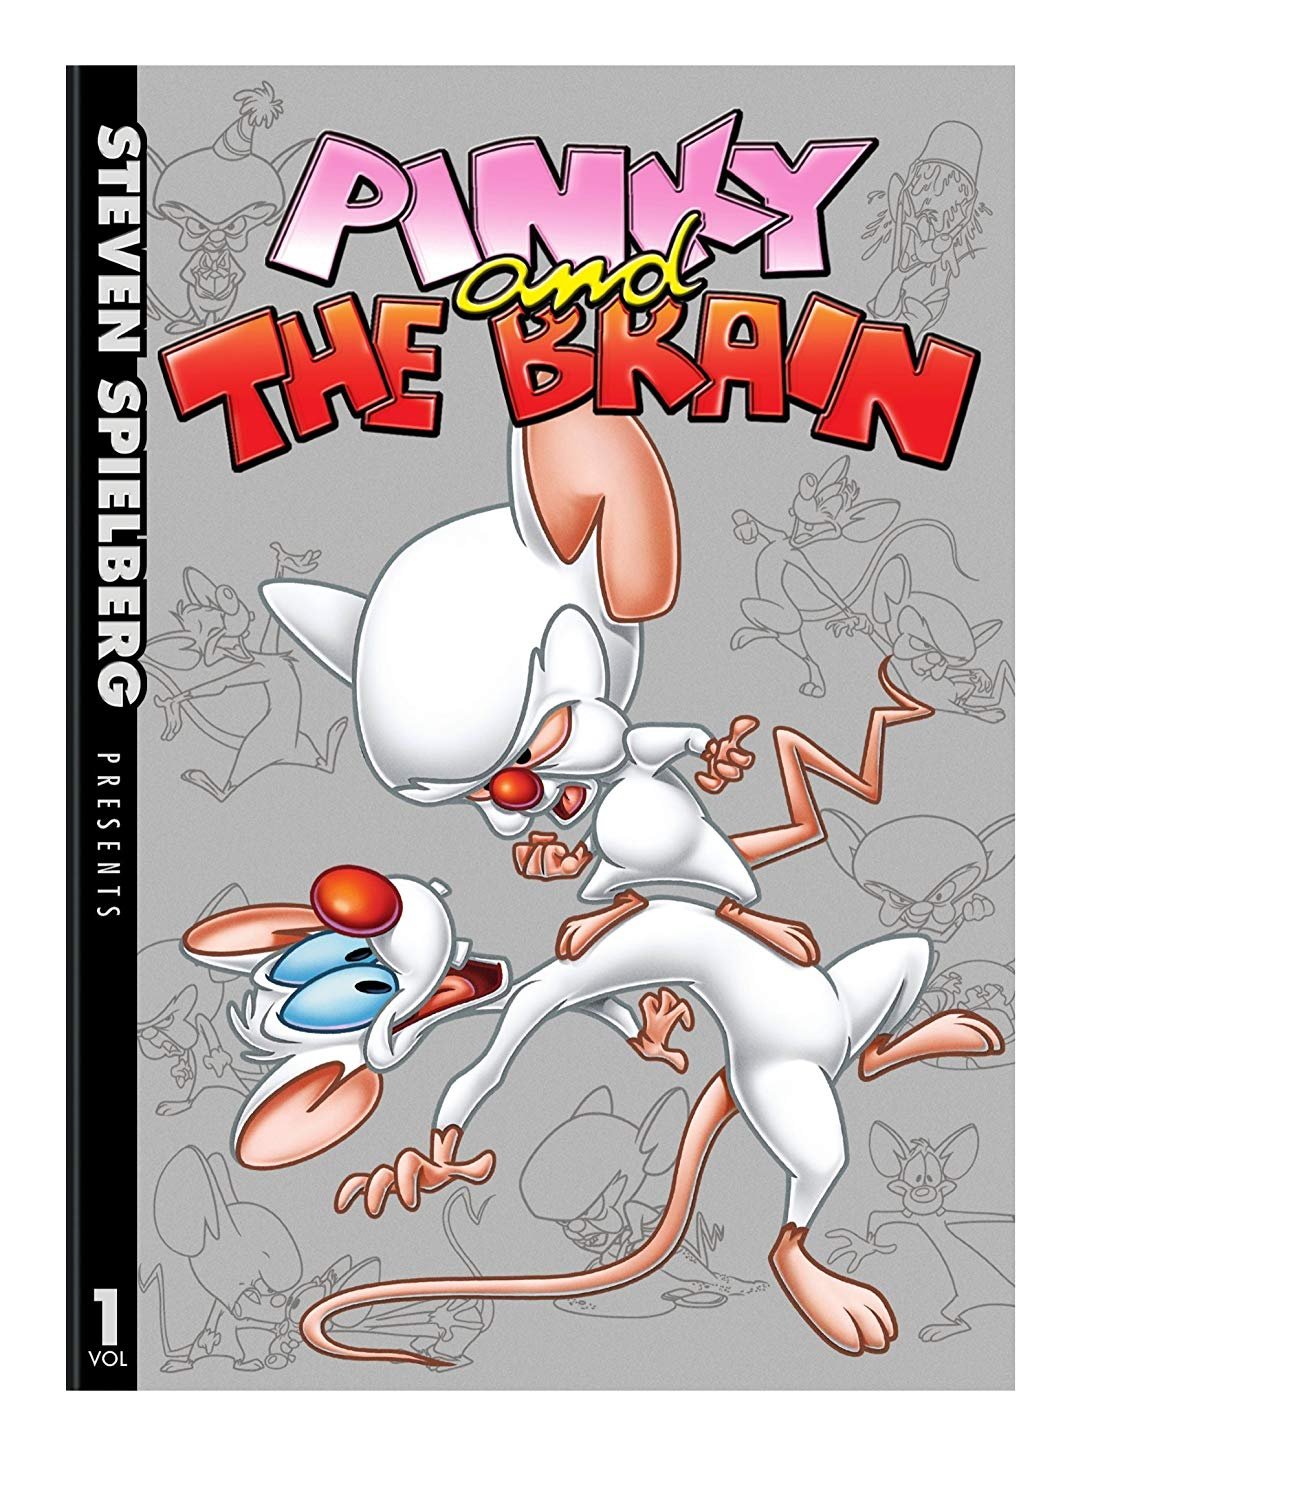 Kinderserie der 90er: Pinky and the Brain